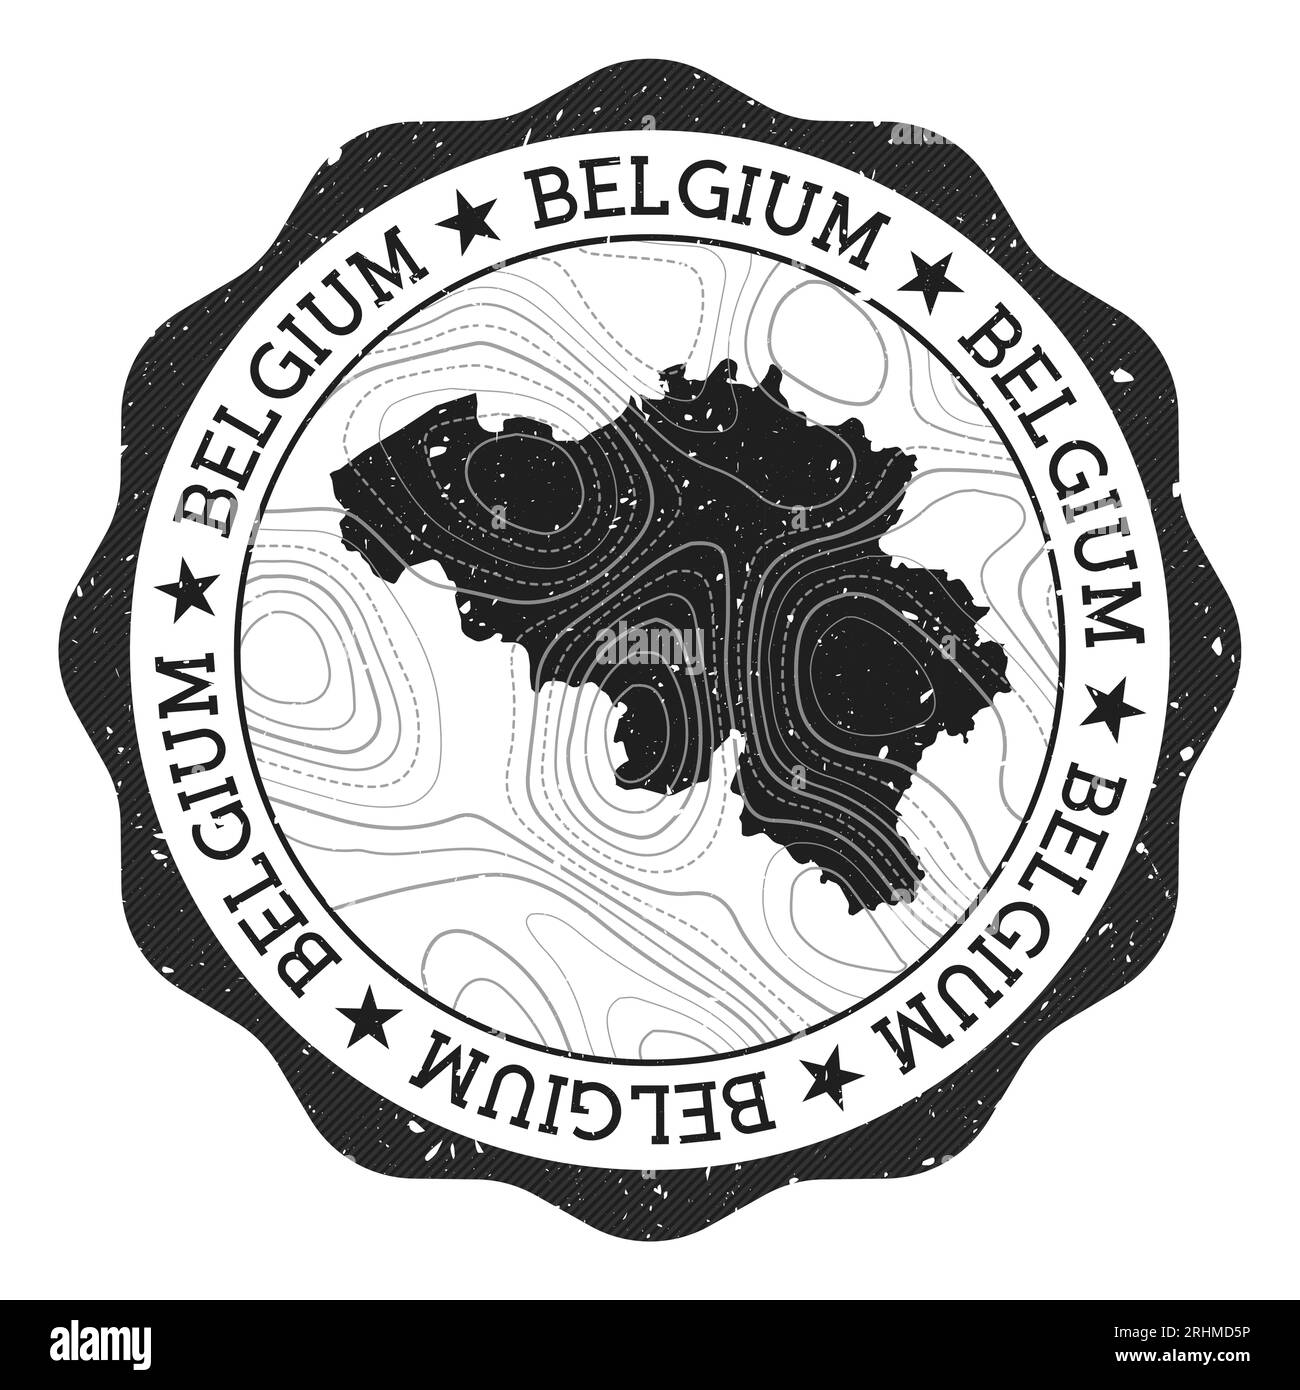 Belgium outdoor stamp. Round sticker with map of country with topographic isolines. Vector illustration. Can be used as insignia, logotype, label, sti Stock Vector